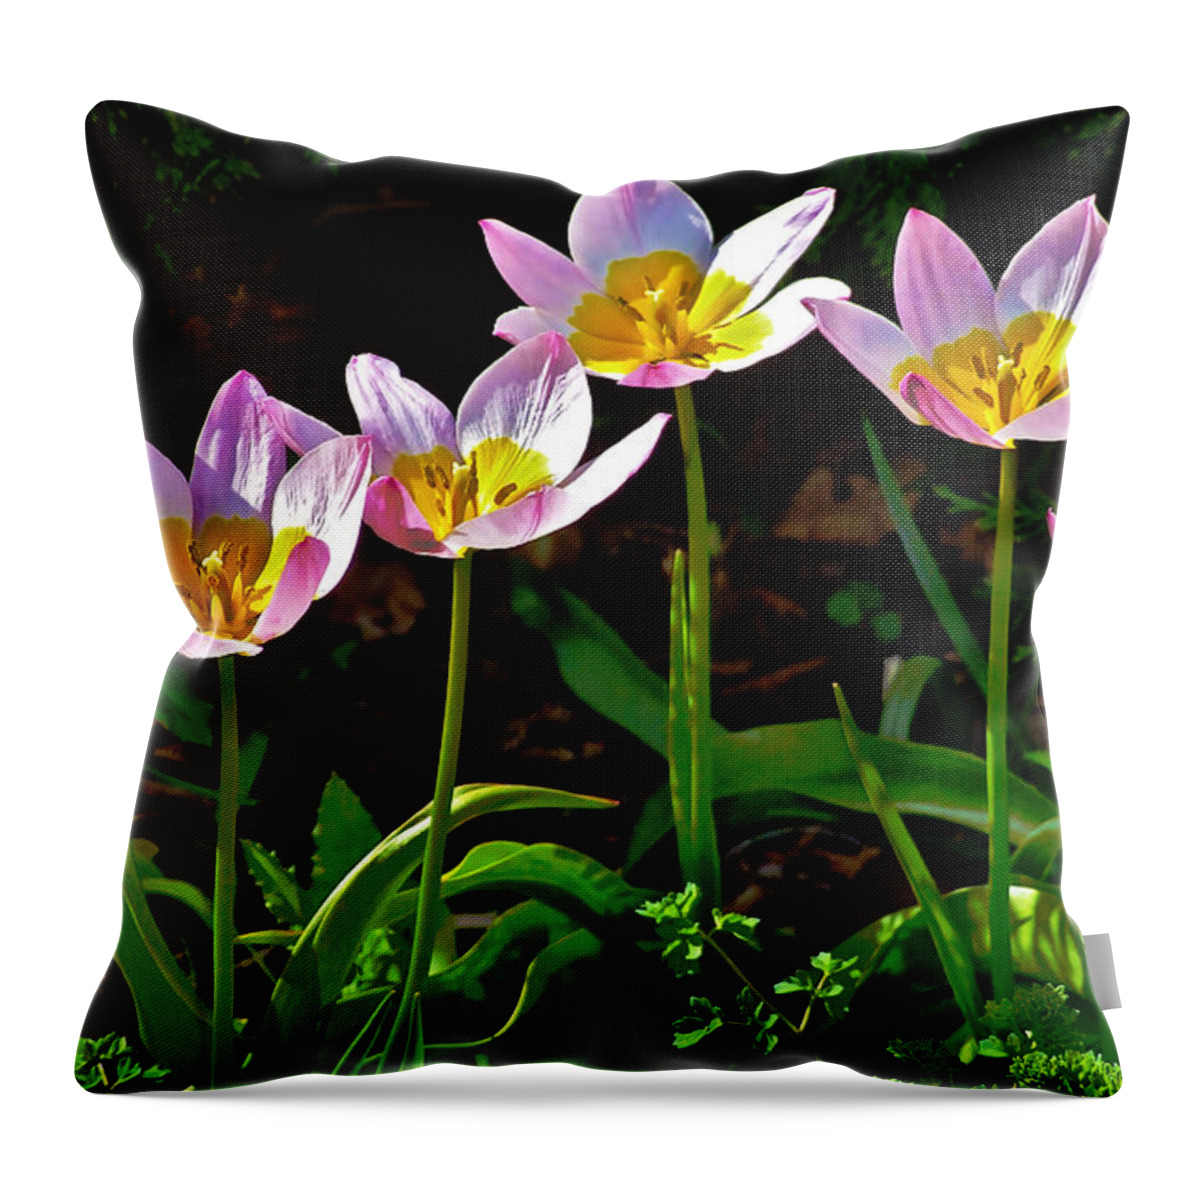 Tulips Throw Pillow featuring the photograph Tulips Meadow Garden by Janis Senungetuk